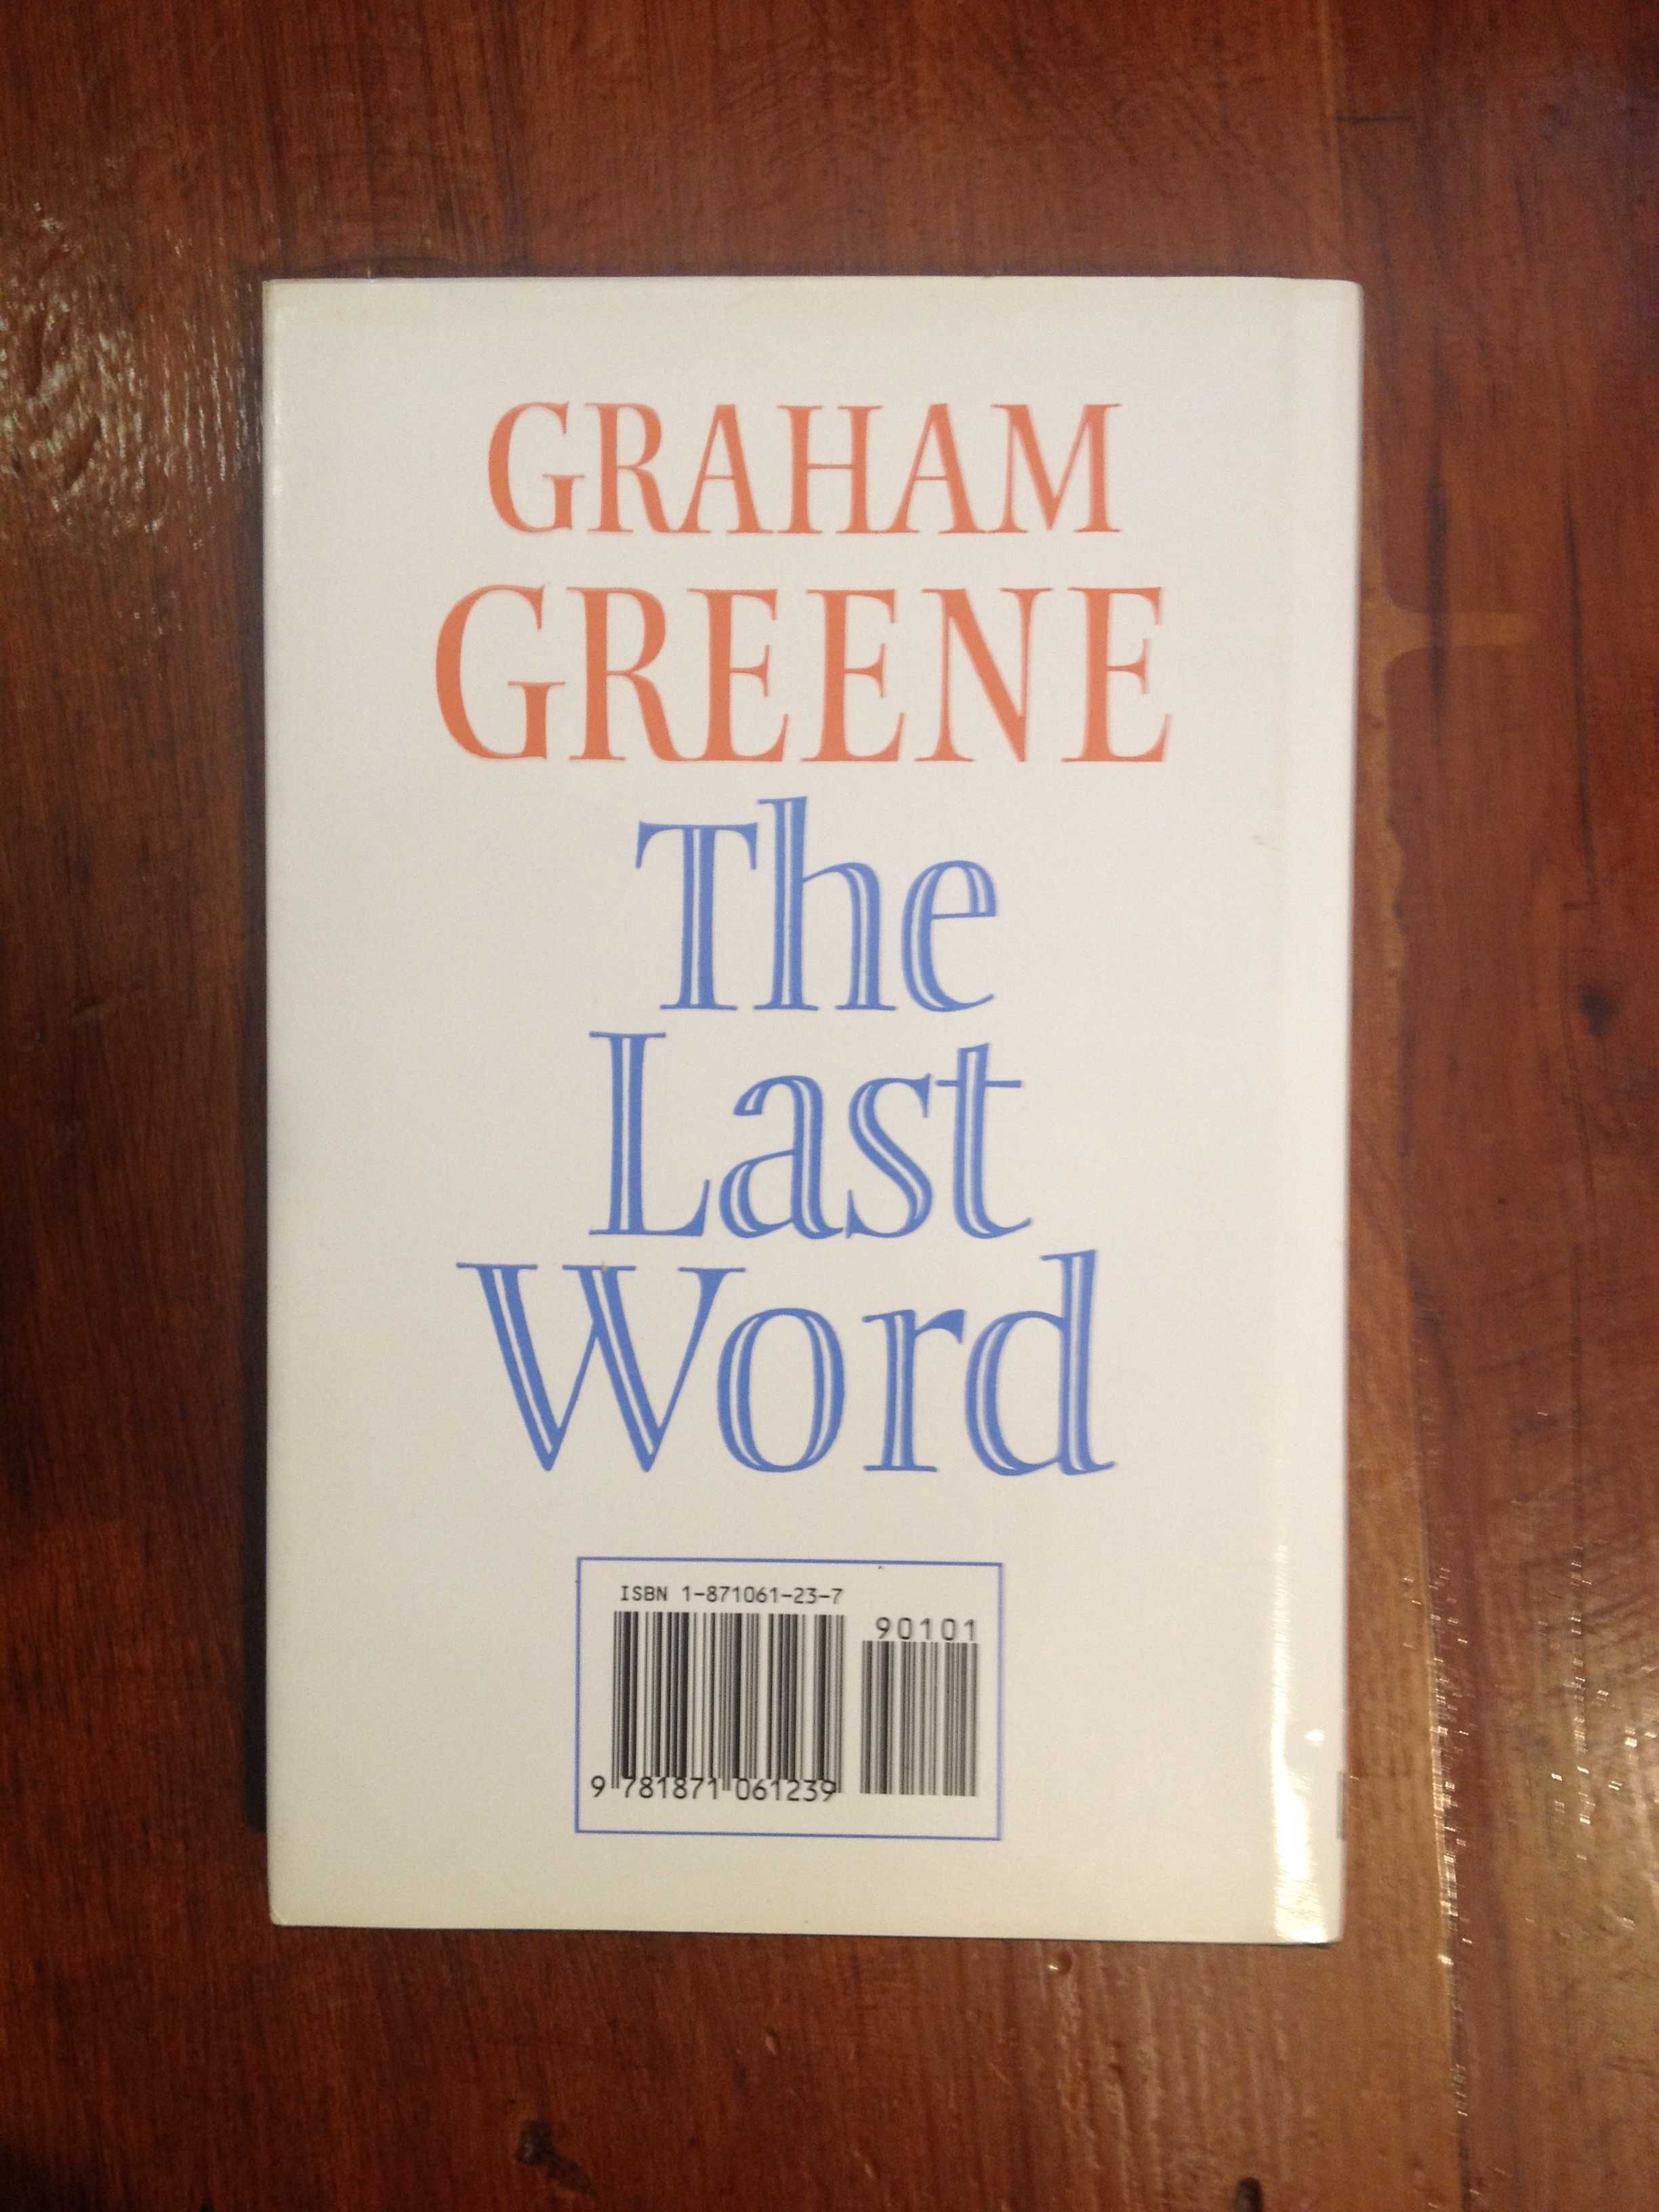 Graham Greene - The last word and other stories